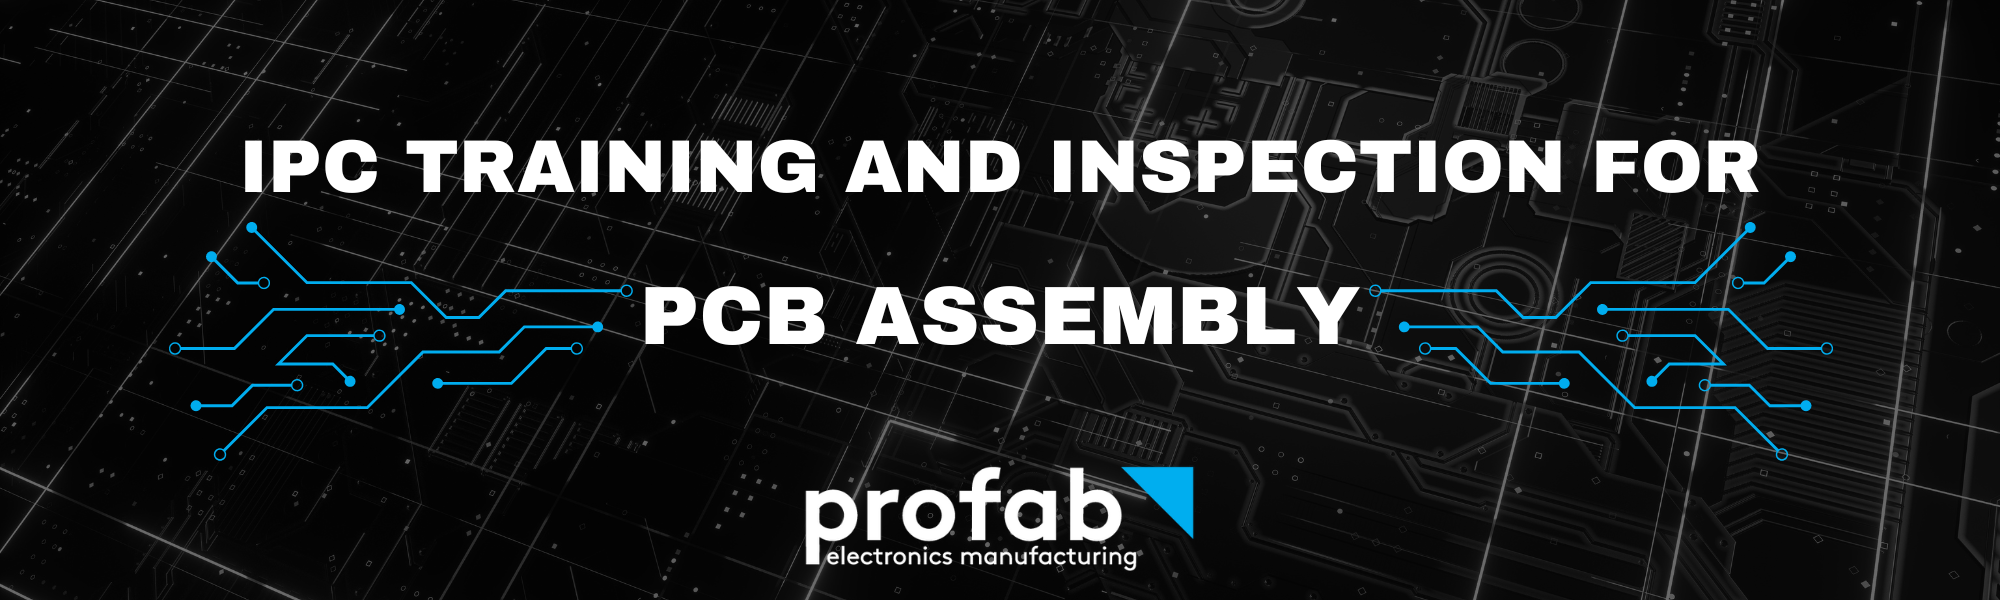 IPC Training and Inspection for PCB Assembly Quality